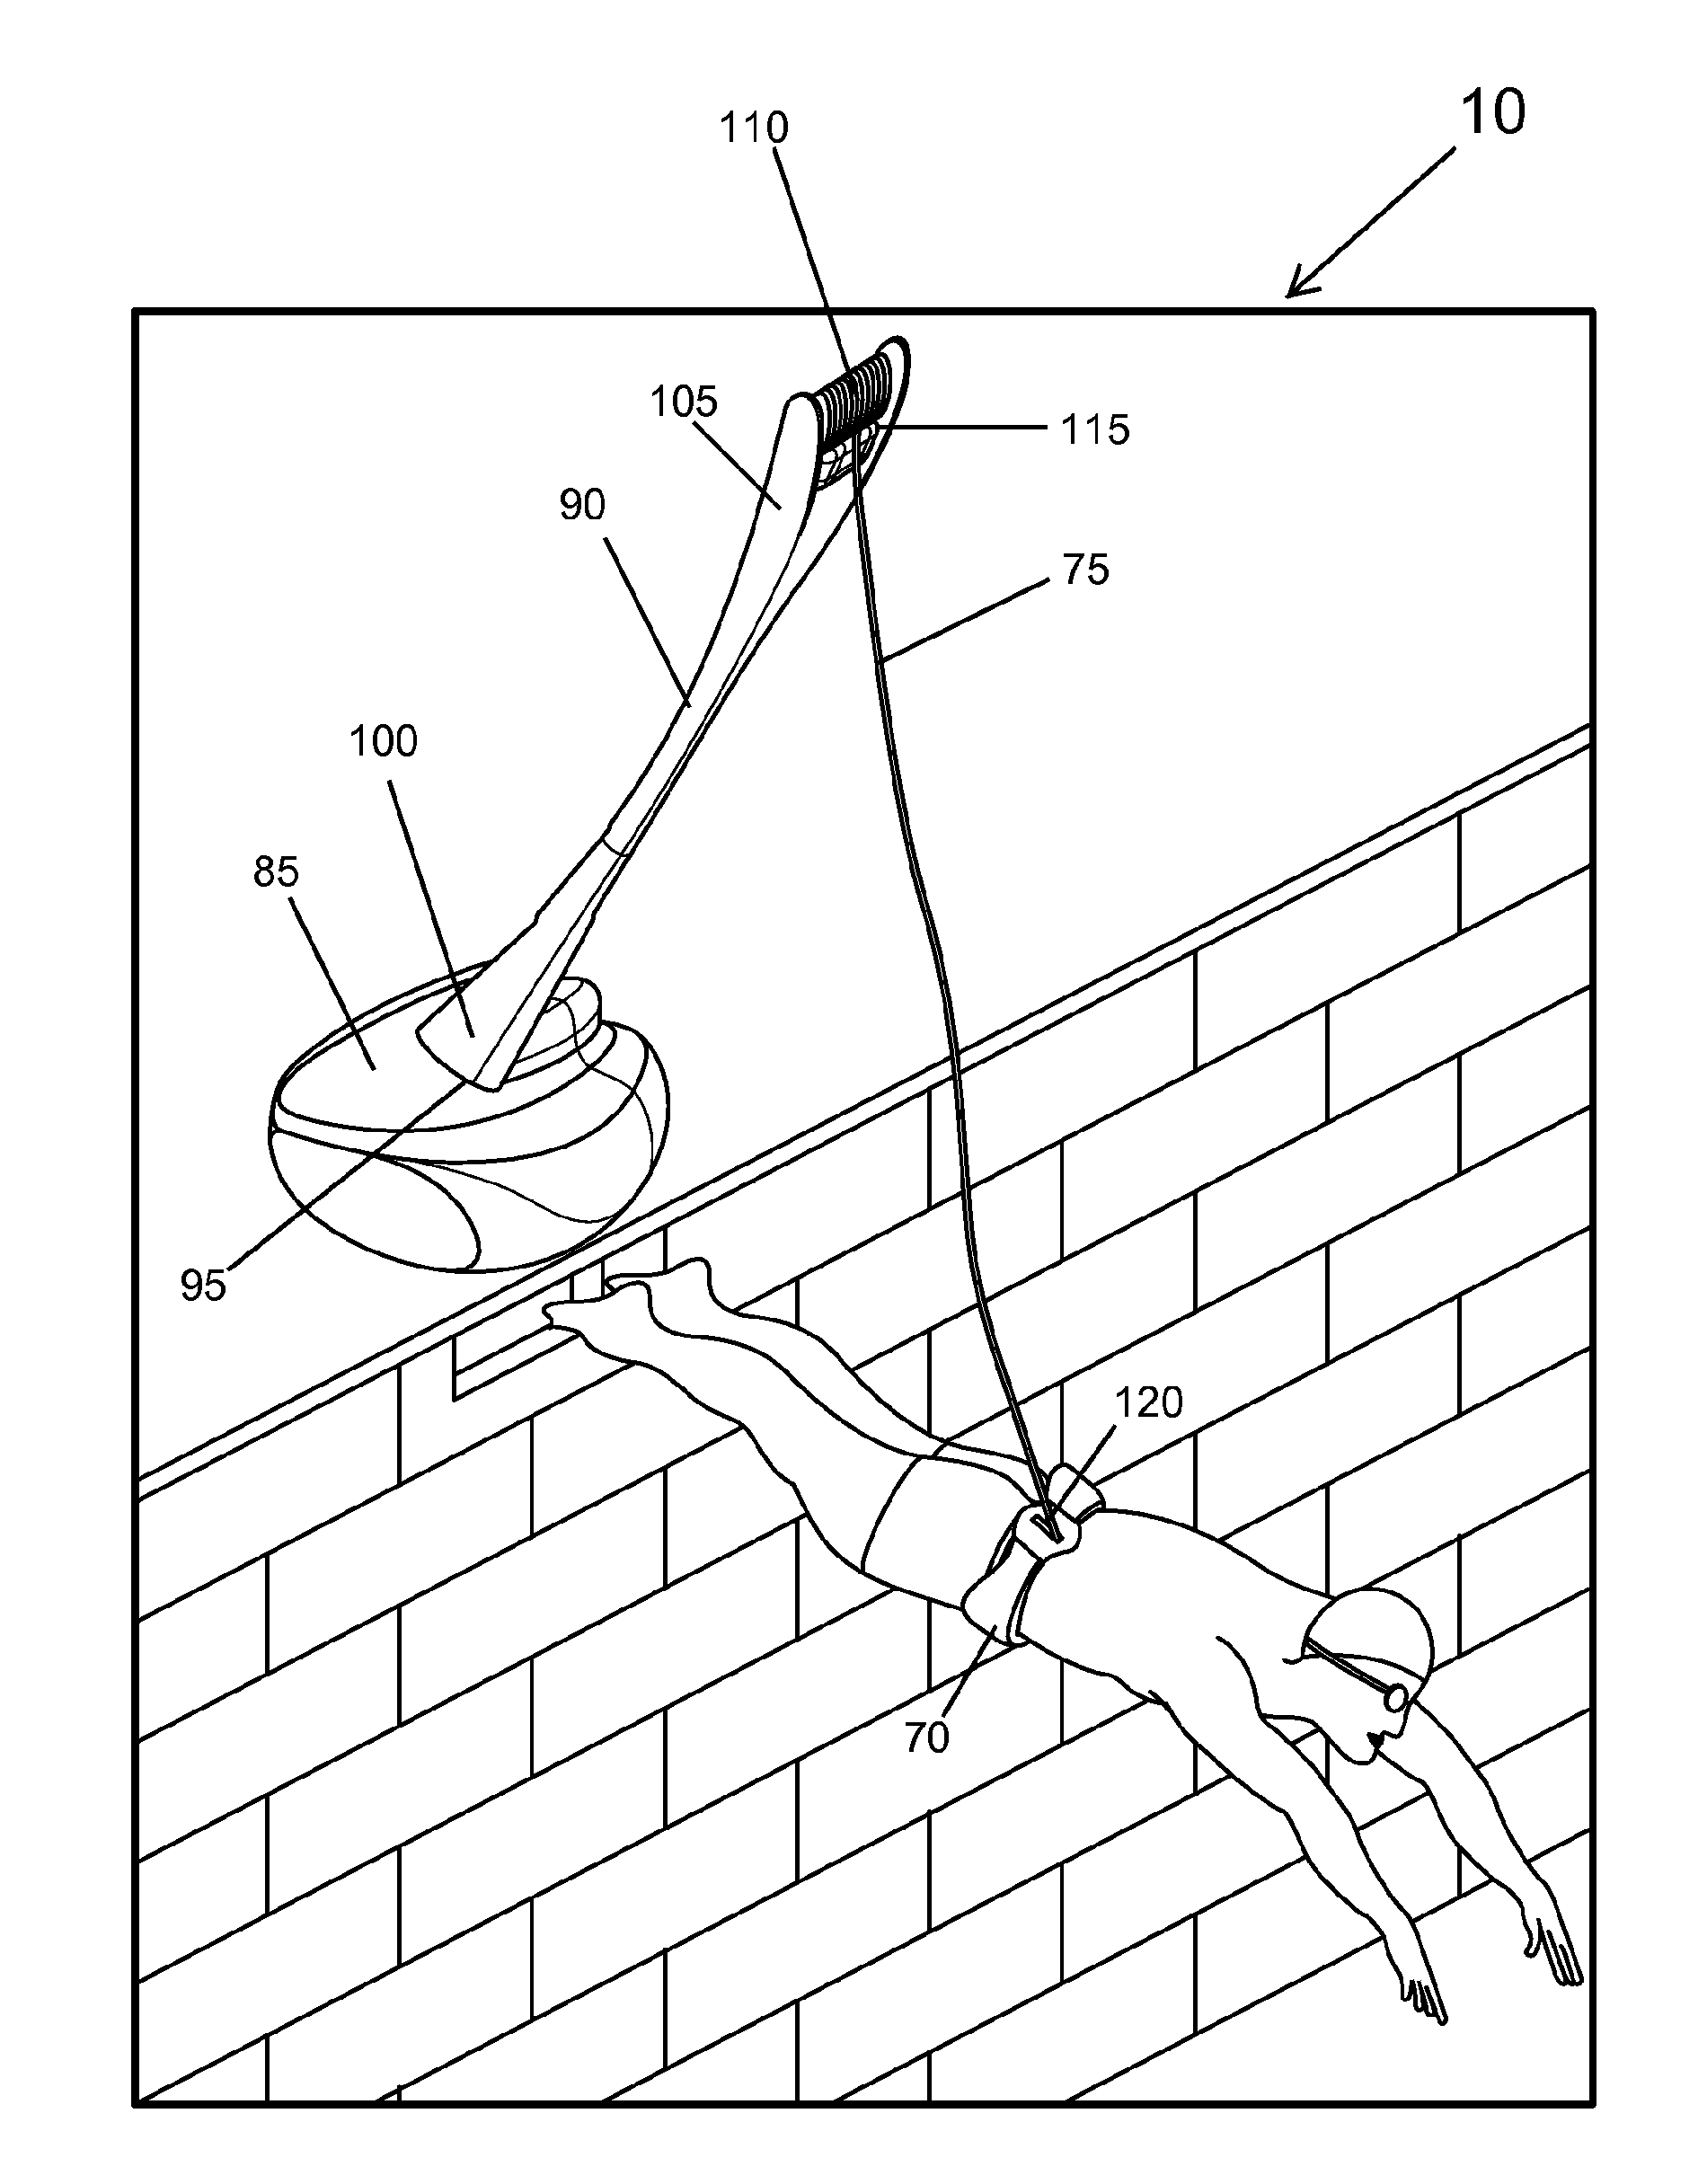 Swimming training system and methods of use